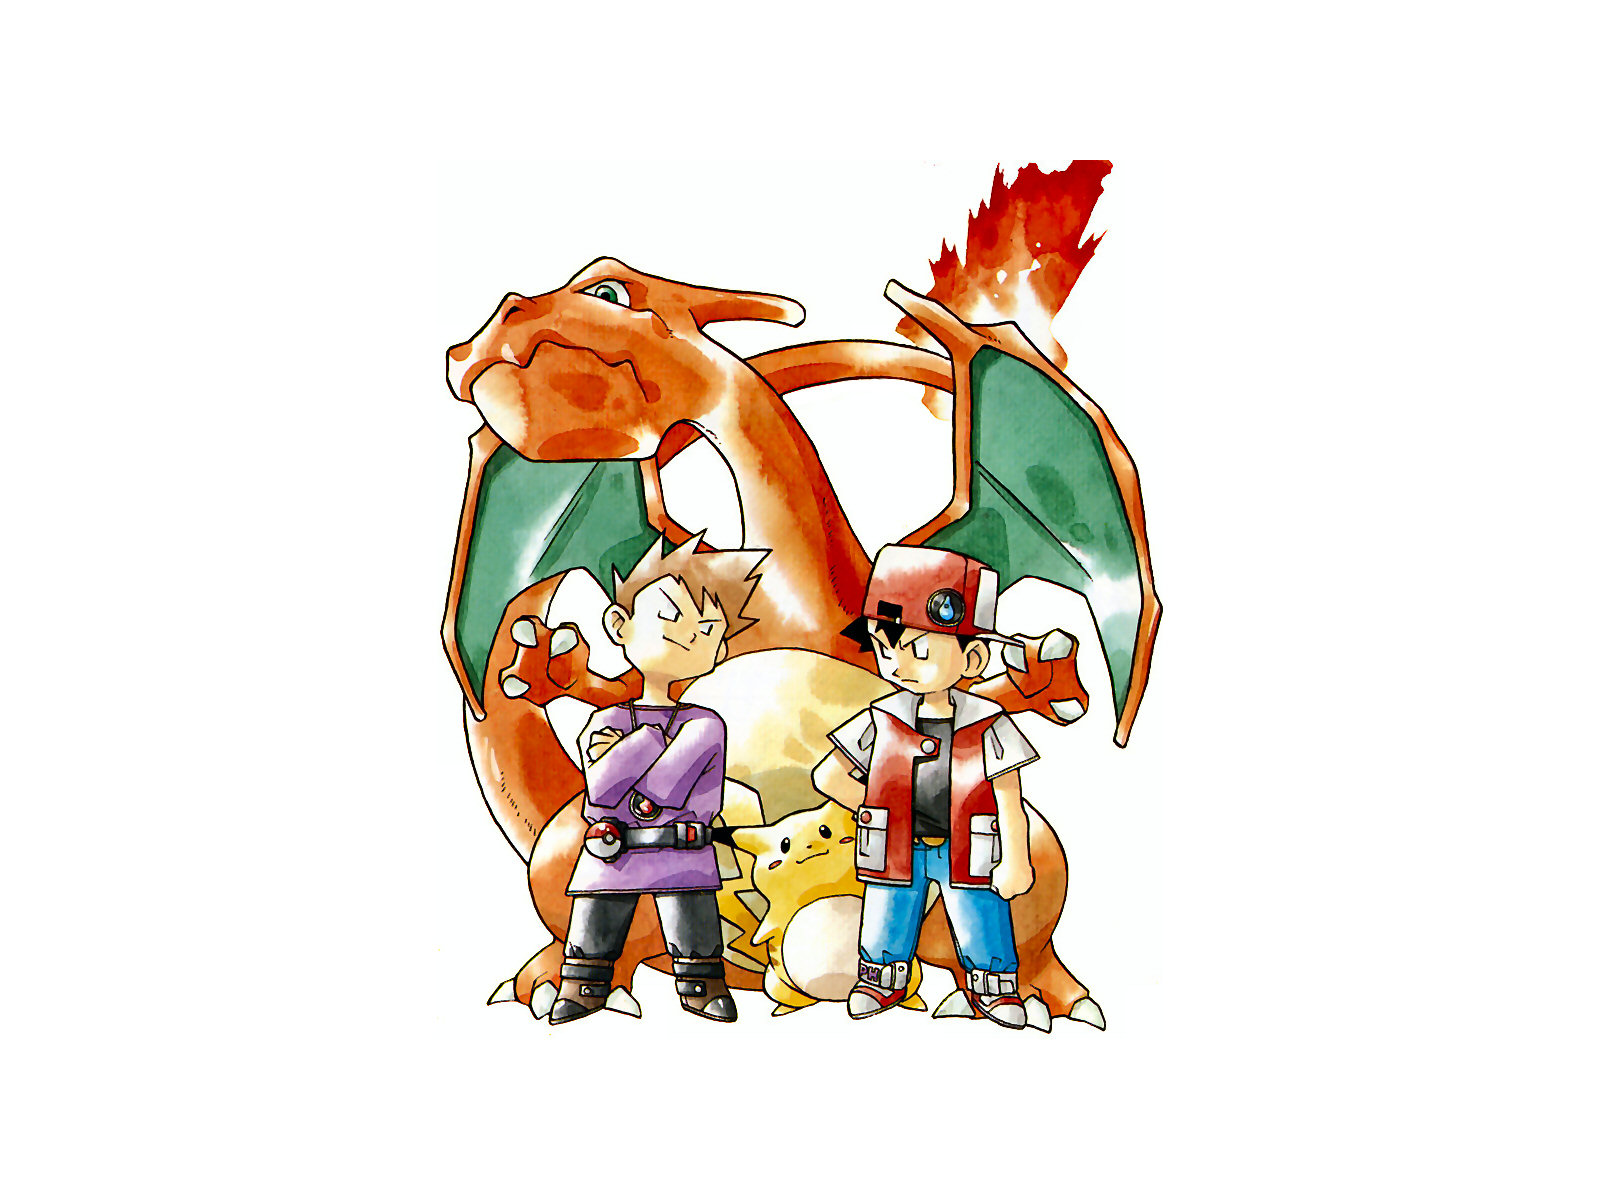 blue (pokémon), video game, pokemon: red and blue, charizard (pokémon), pikachu, red (pokémon), pokémon